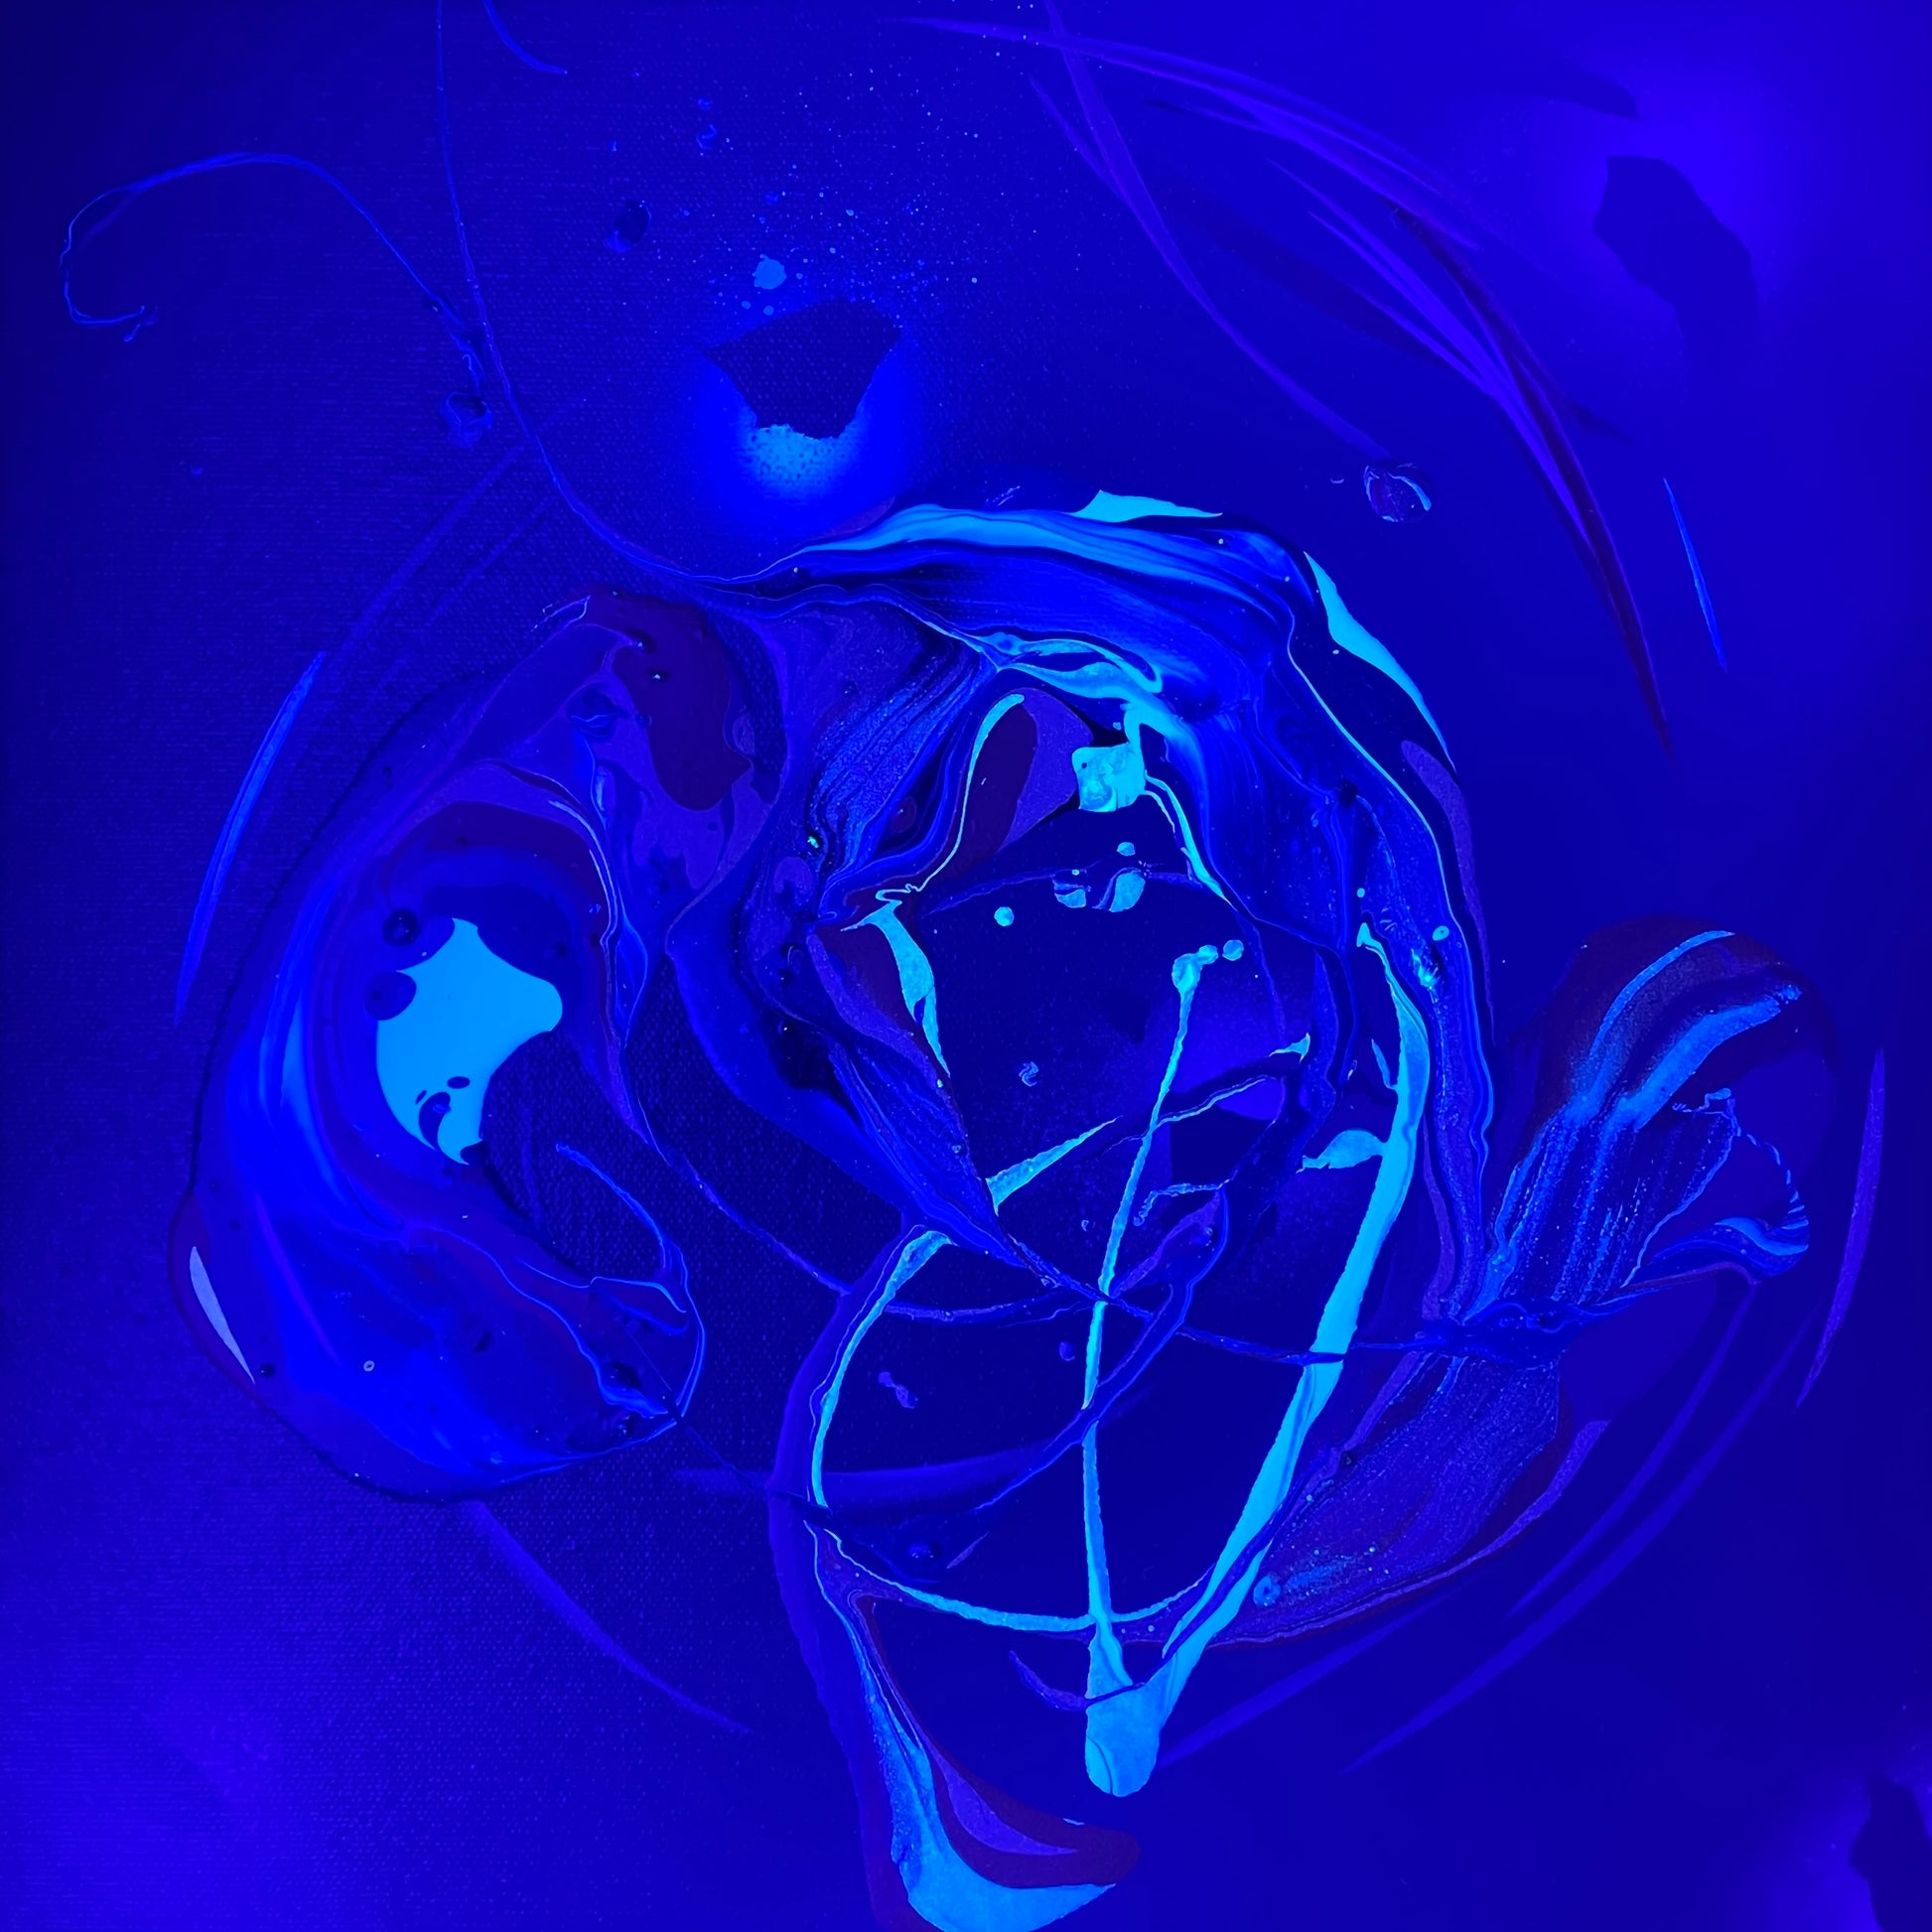 trippy abstract art with blacklight effects